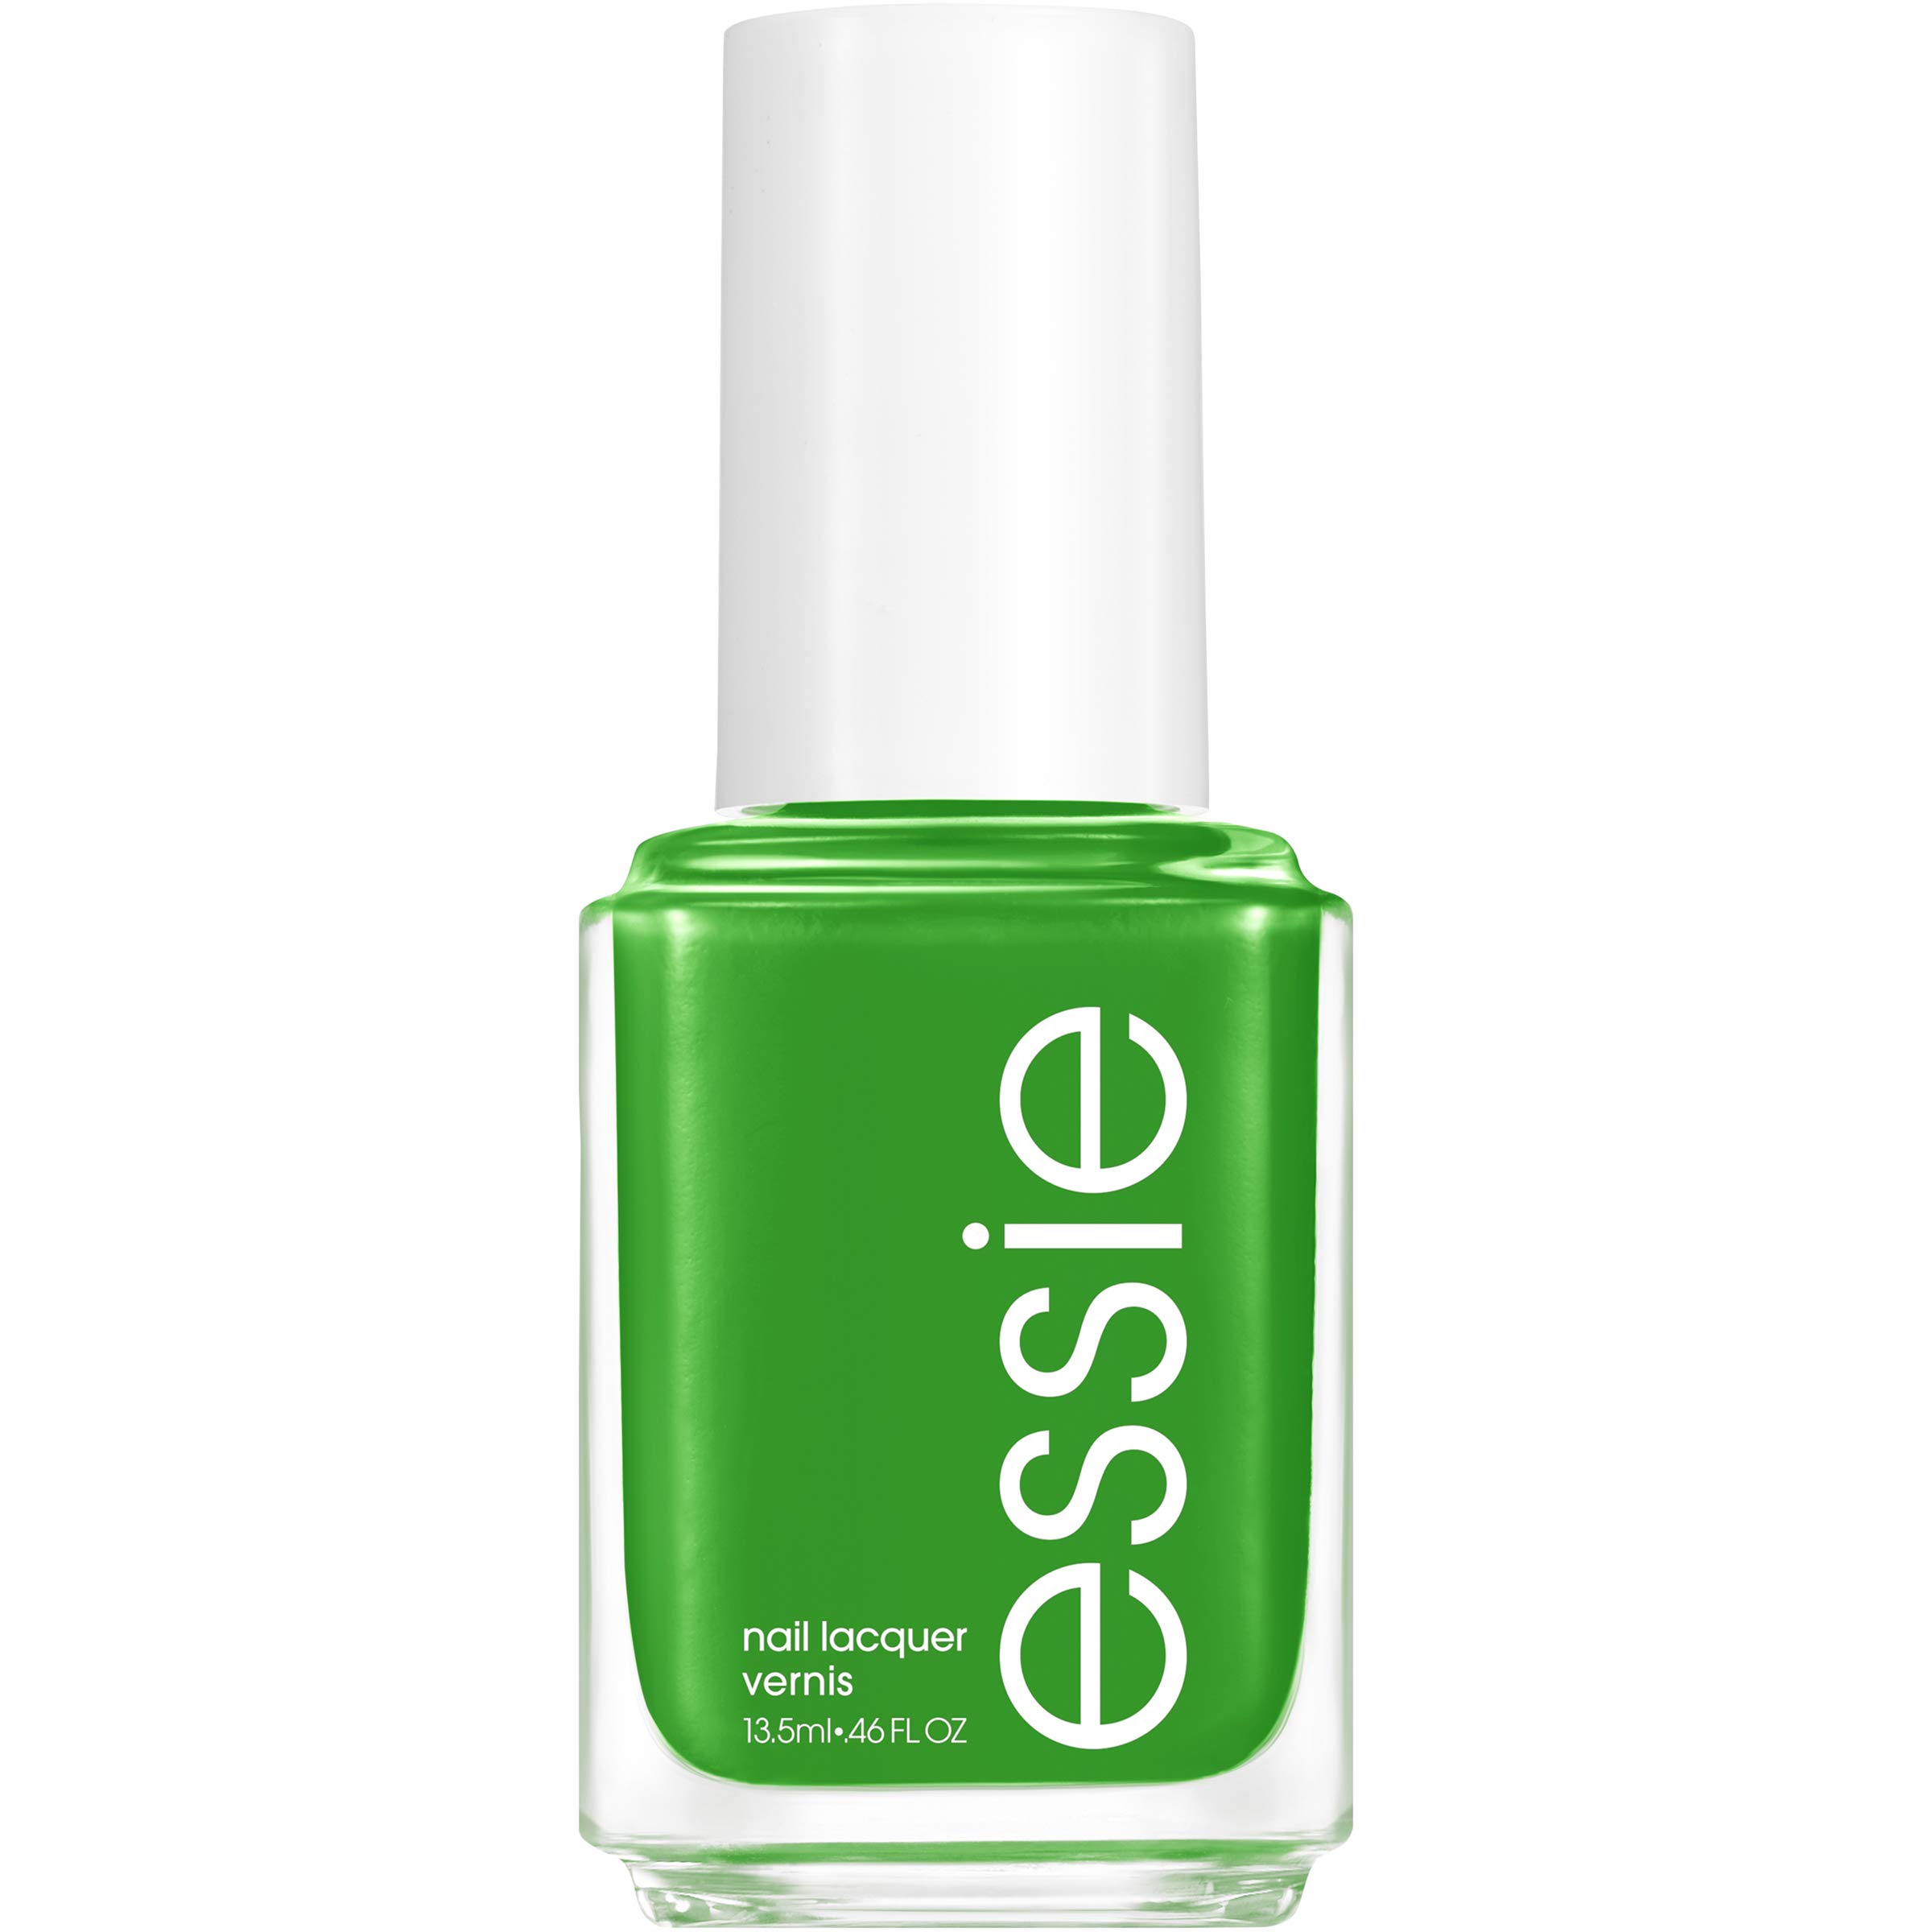 Pea Green Is The Unexpected Nail Color Trend Bringing Retro Vibes To Your  Manicure